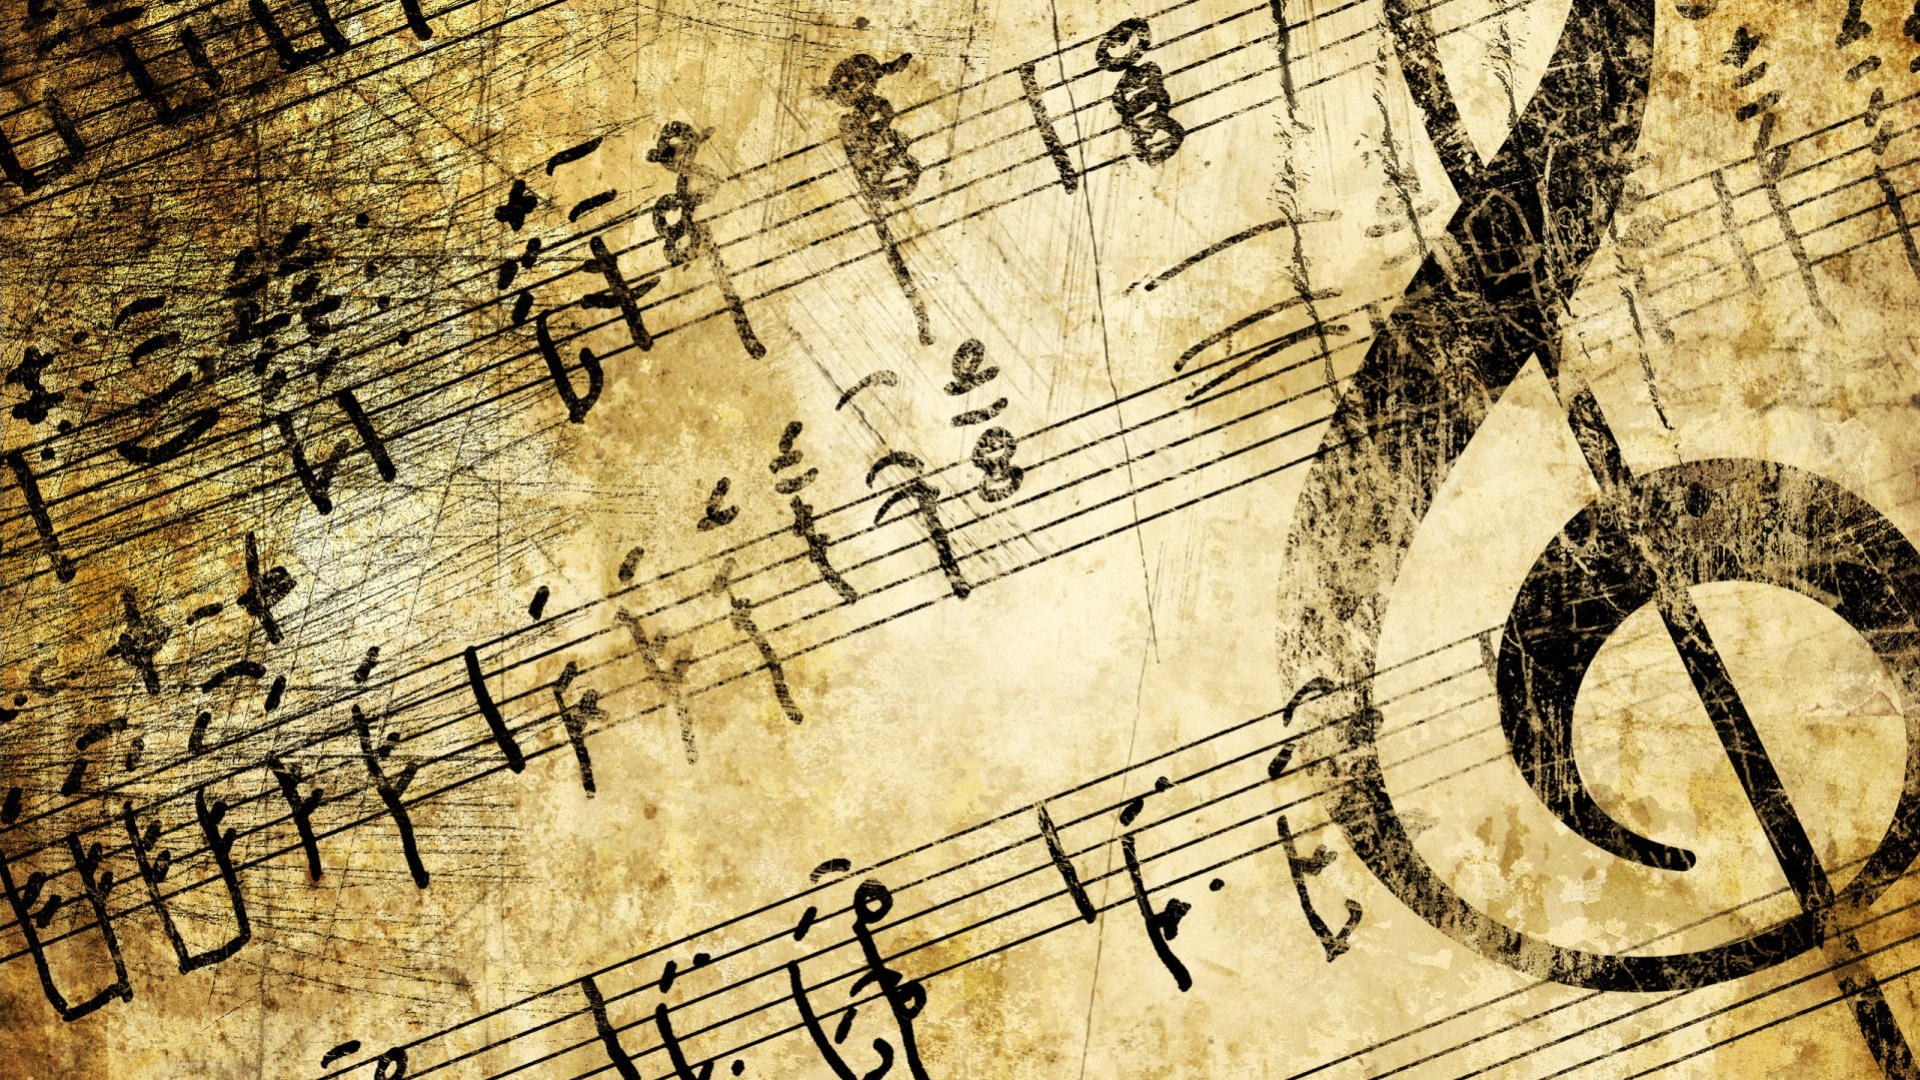 1920x1080 Free download Classical Music Note Wallpaper [] for your Desktop, Mobile \u0026 Tablet | Explore 74+ Music Note Wallpapers | Musical Wallpaper for Rooms, Wallpaper Borders Musical Notes, Blue Music Notes Wallpaper